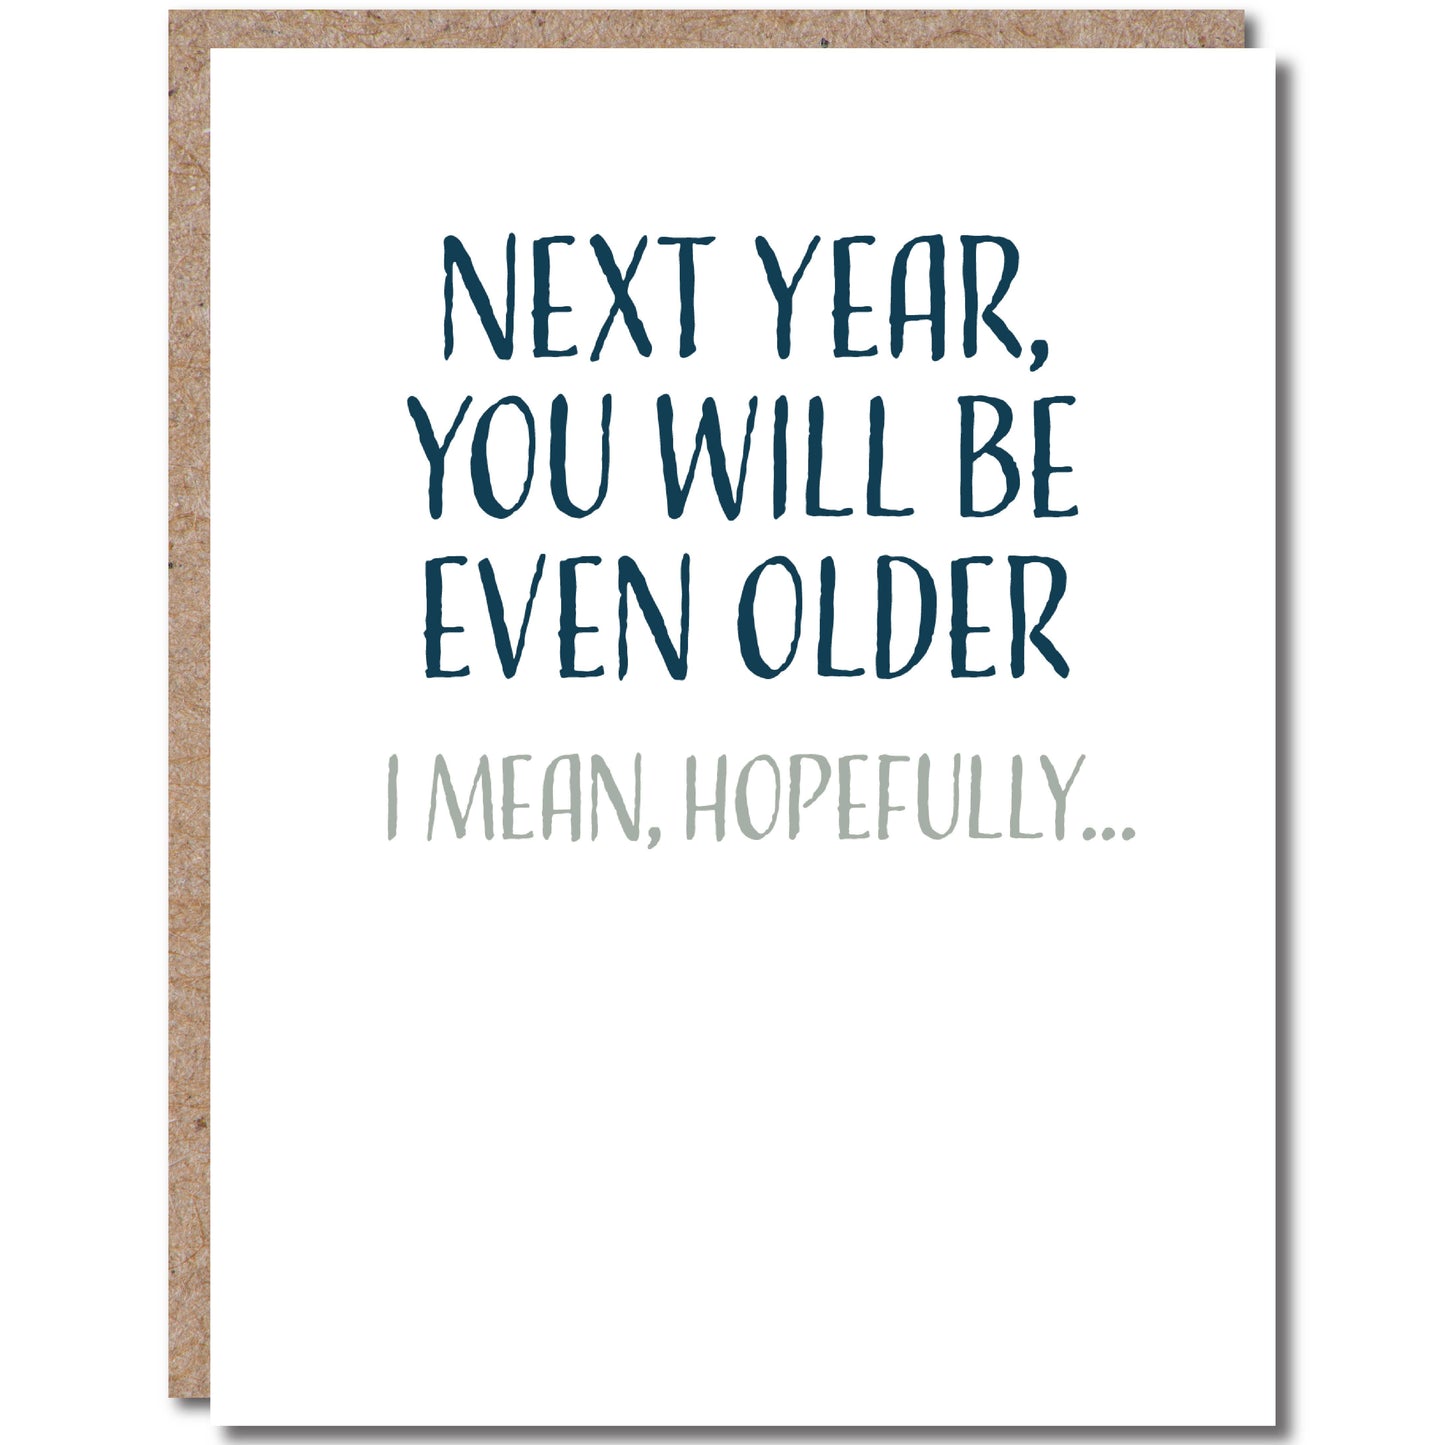 Next Year you will be even older